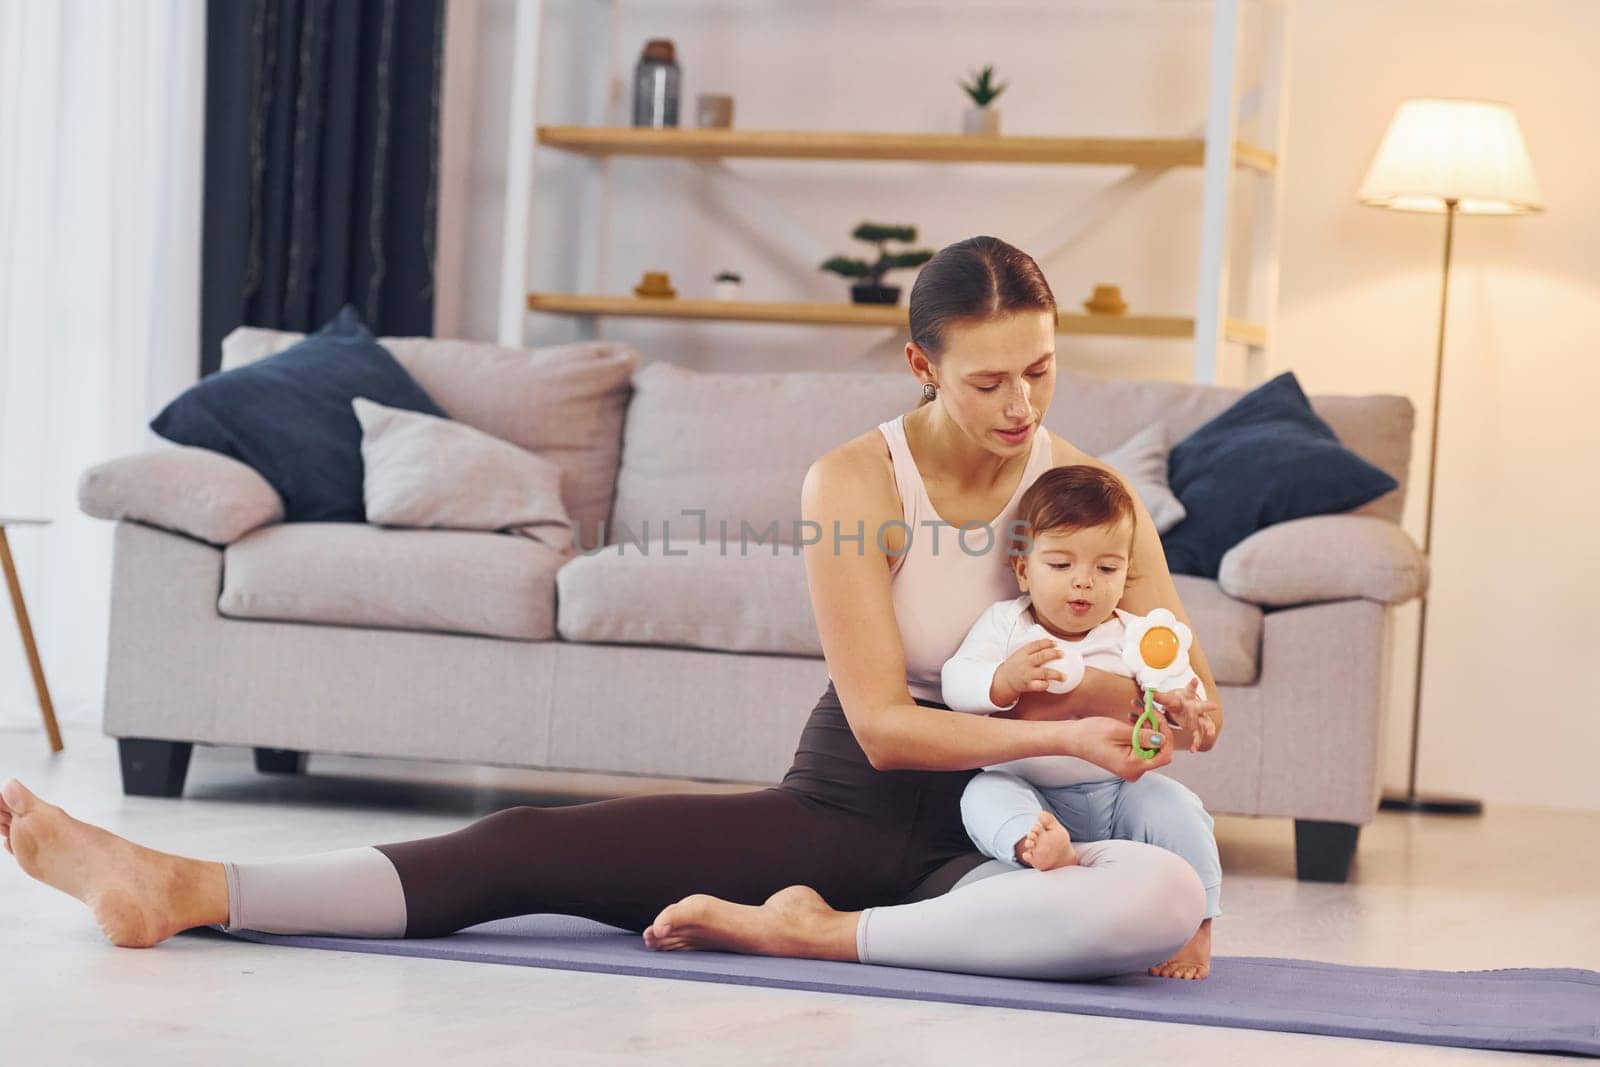 On the yoga mat. Mother with her little daughter is at home together.